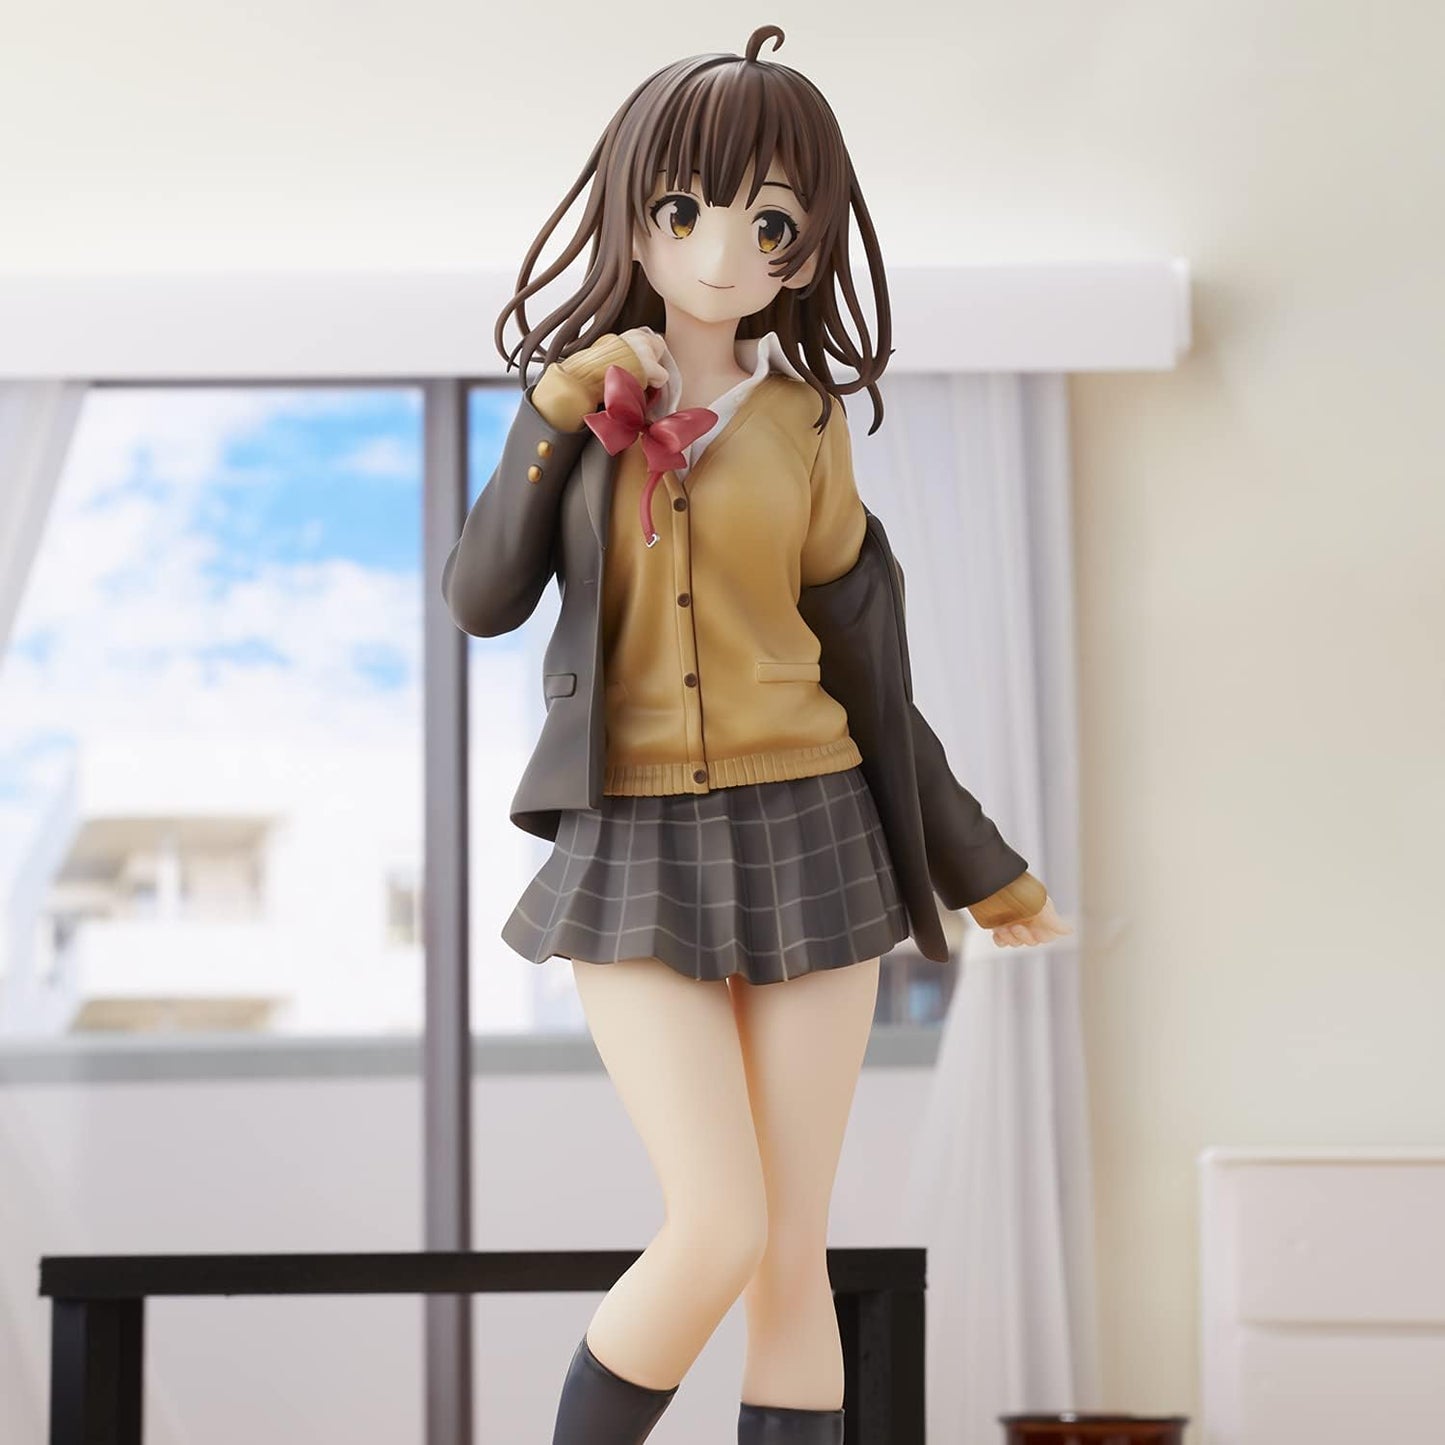 HIGEHIRO: AFTER BEING REJECTED, I SHAVED AND TOOK IN A HIGH SCHOOL RUNAWAY SAYU OGIWARA SCALE FIGURE